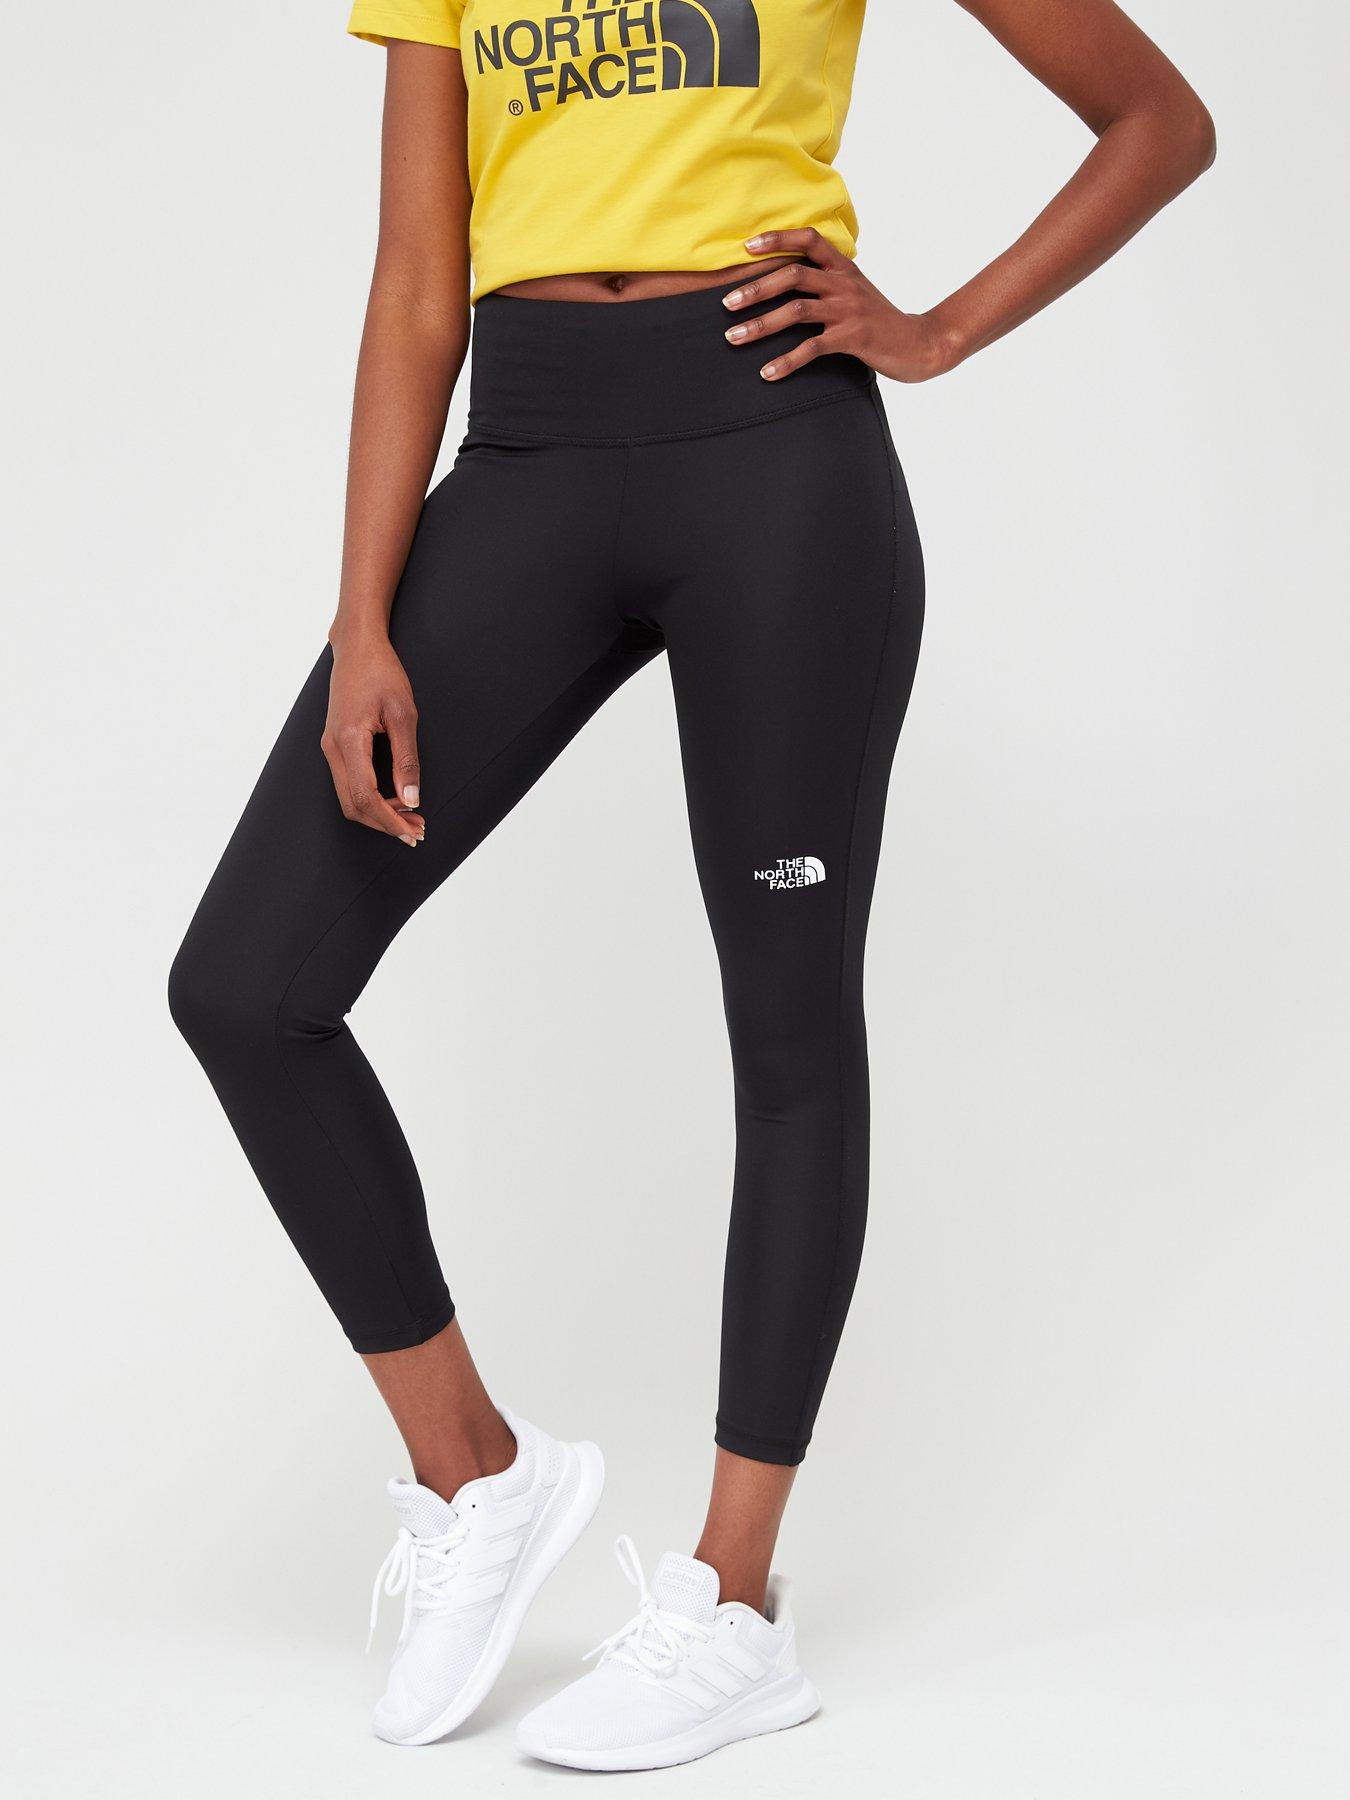 the north face leggings womens Hot Sale - OFF 59%